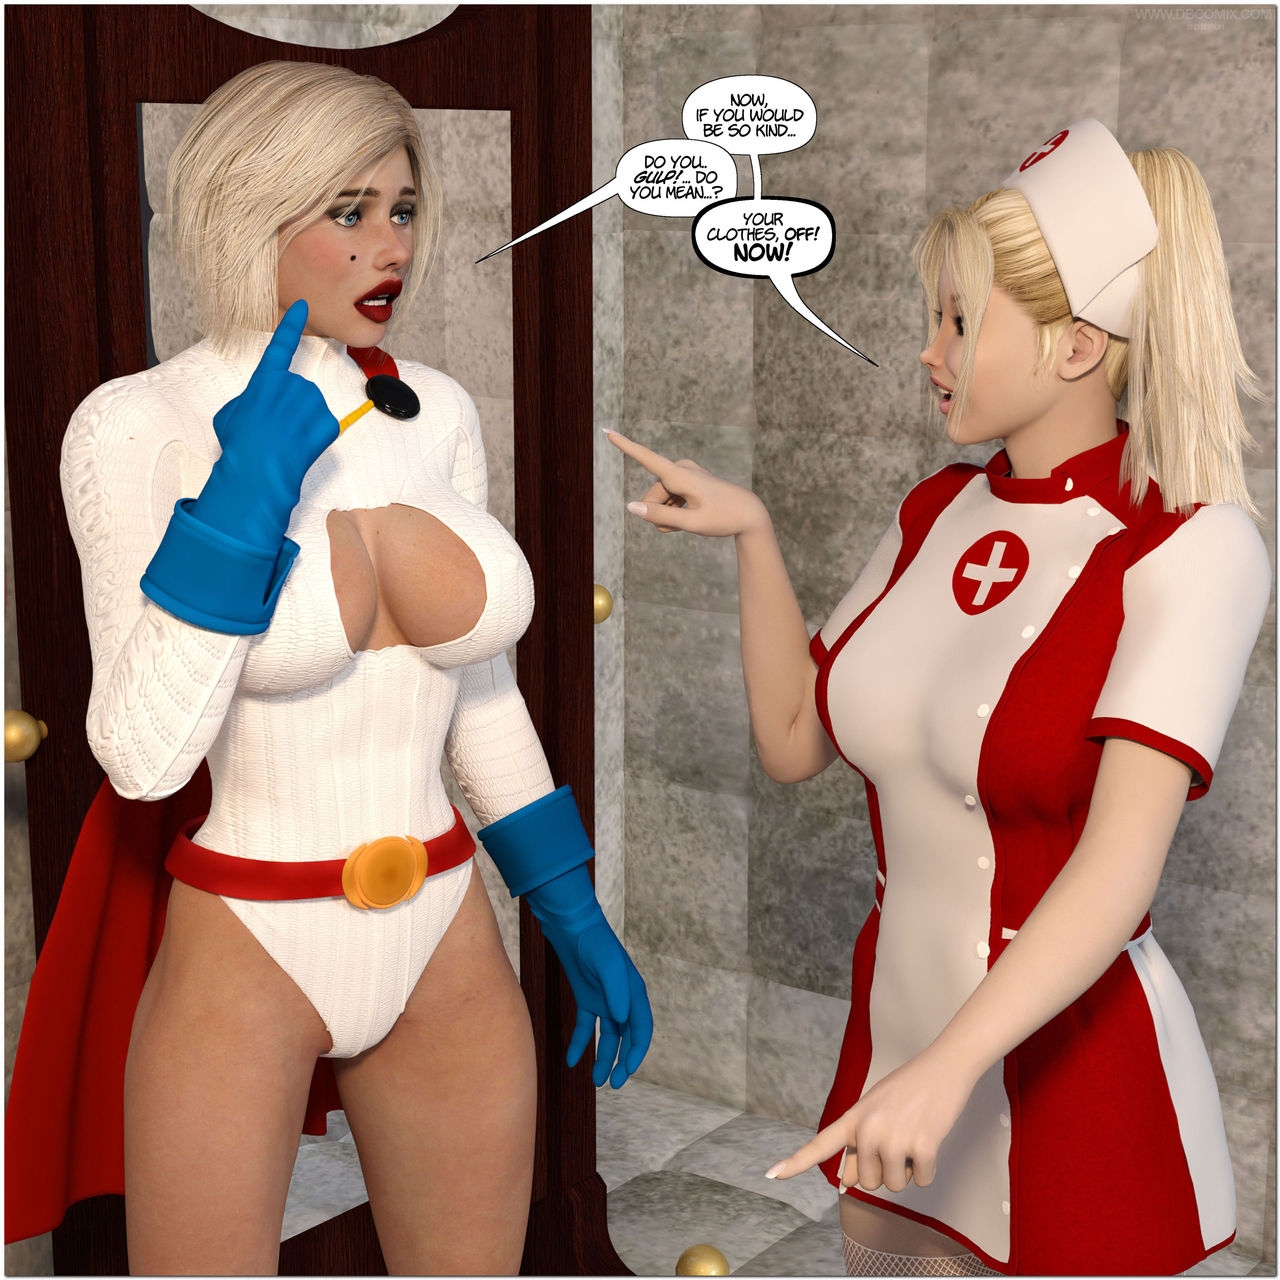 [DBComix] New Arkham For Superheroines 1 2nd Edition - Humiliation and Degradation of Power Girl 25